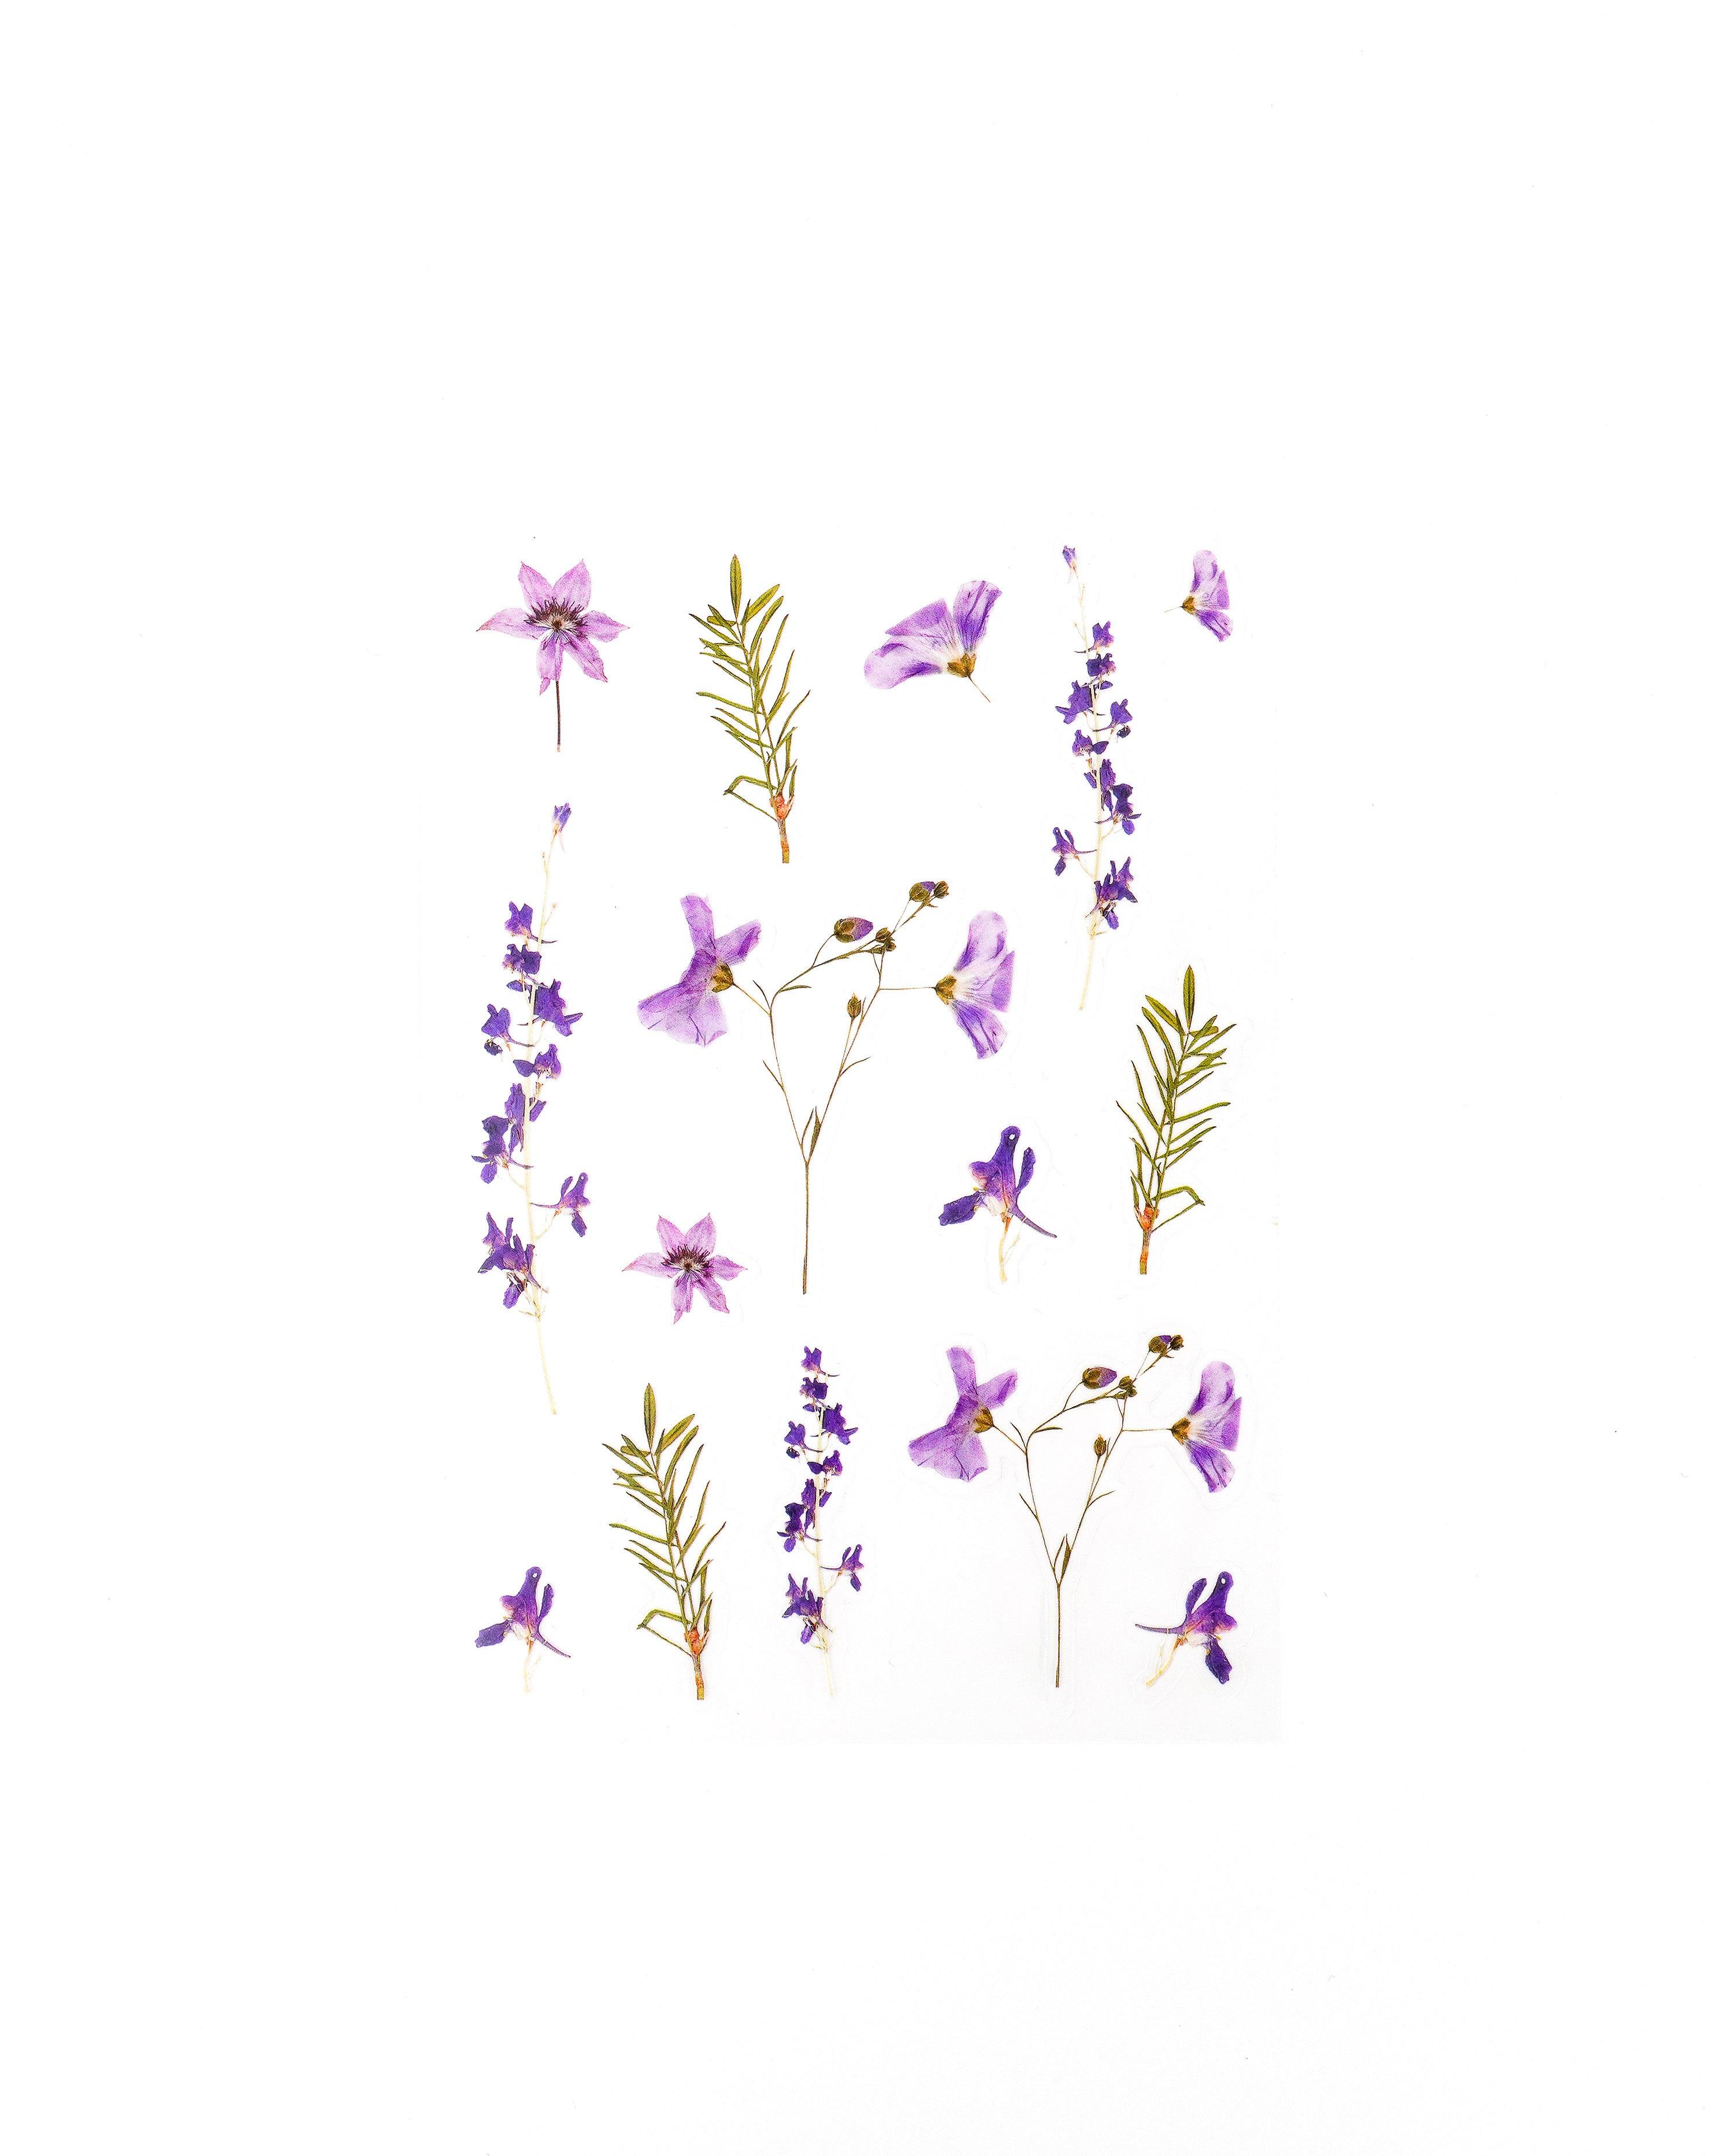 Transparent purple floral stickers sold by Jane's Agenda.